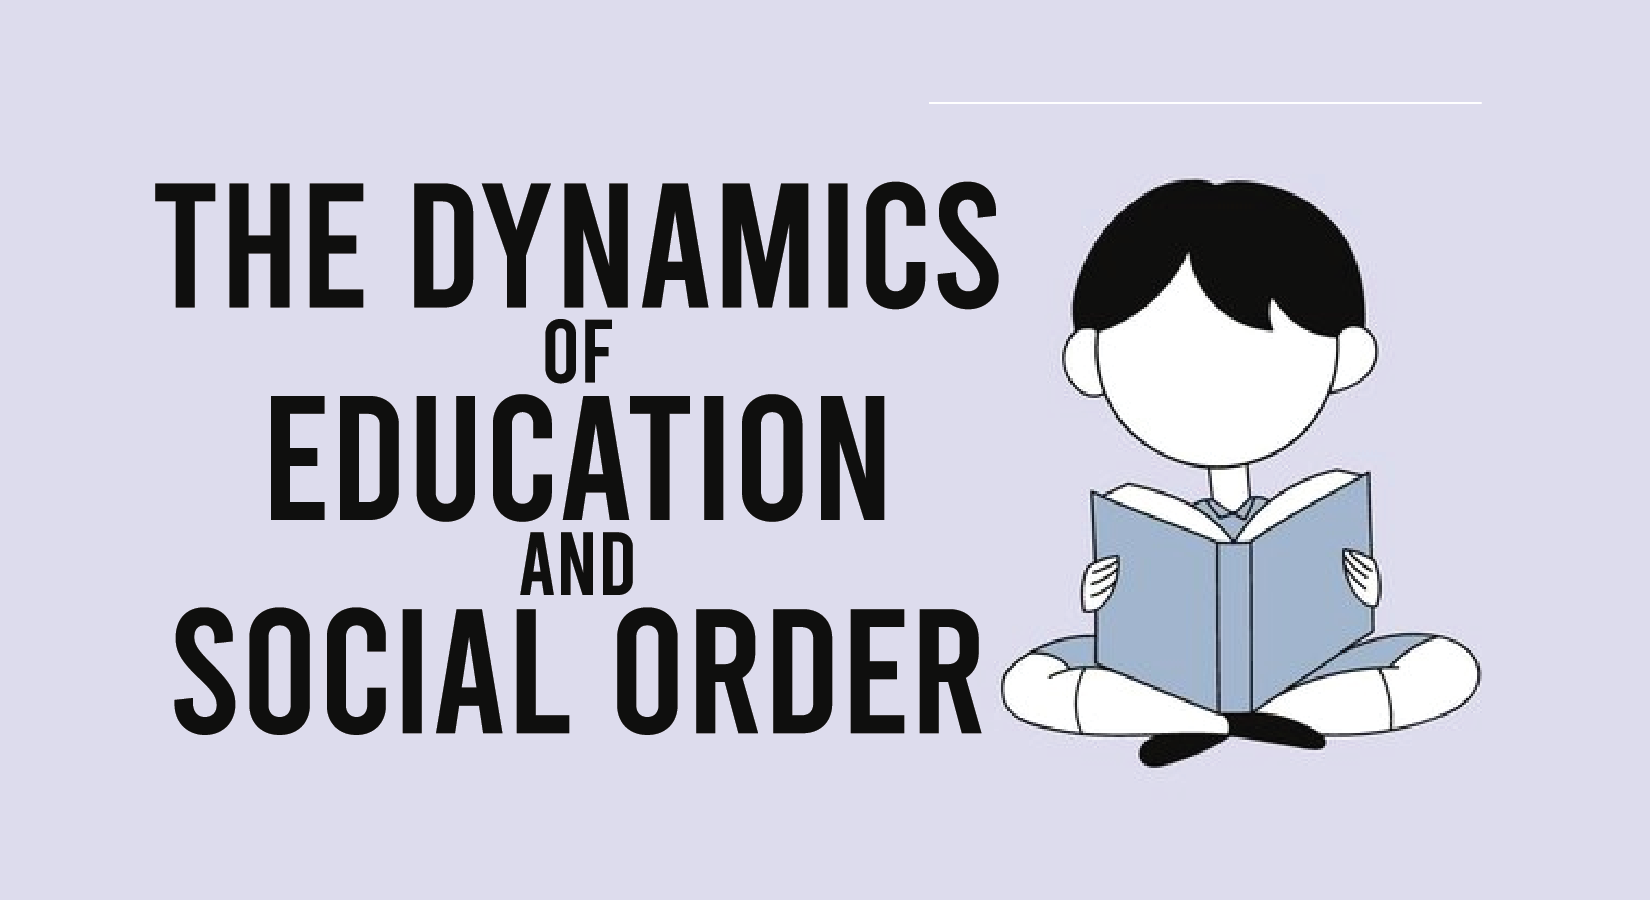 The Dynamics of Education and Social Order